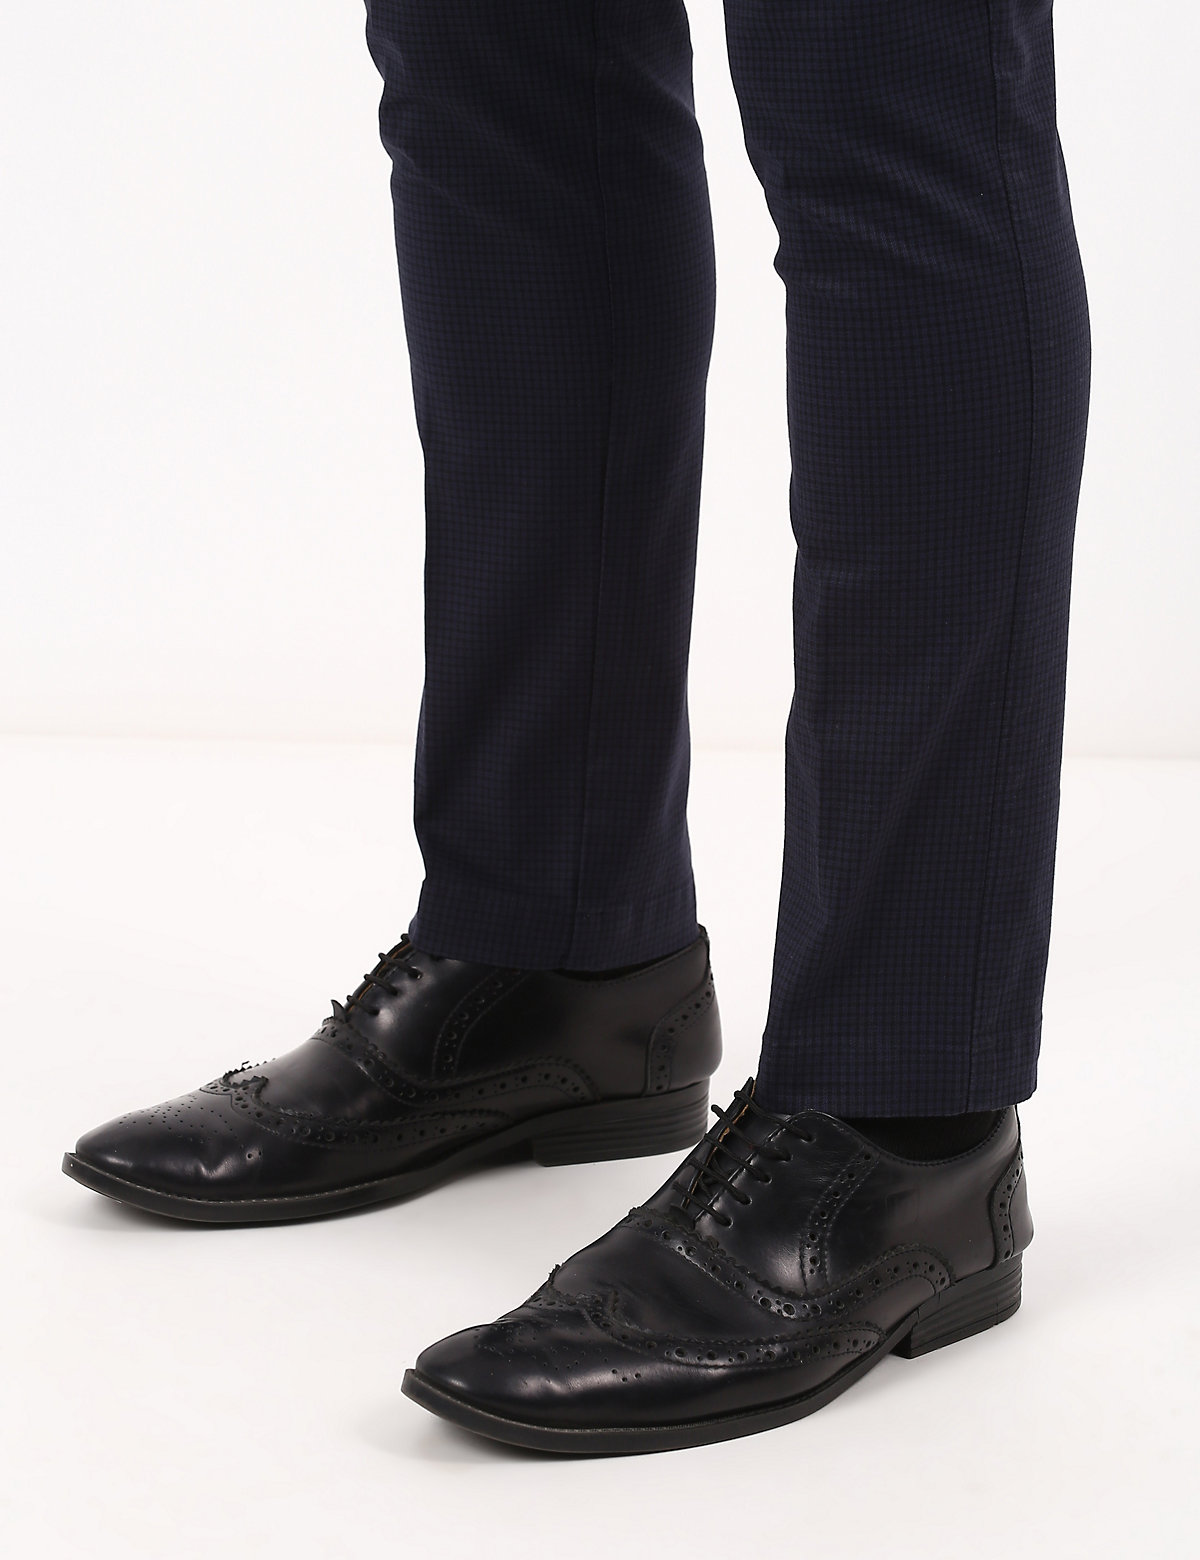 Slim Fit Limited Structure Chinos